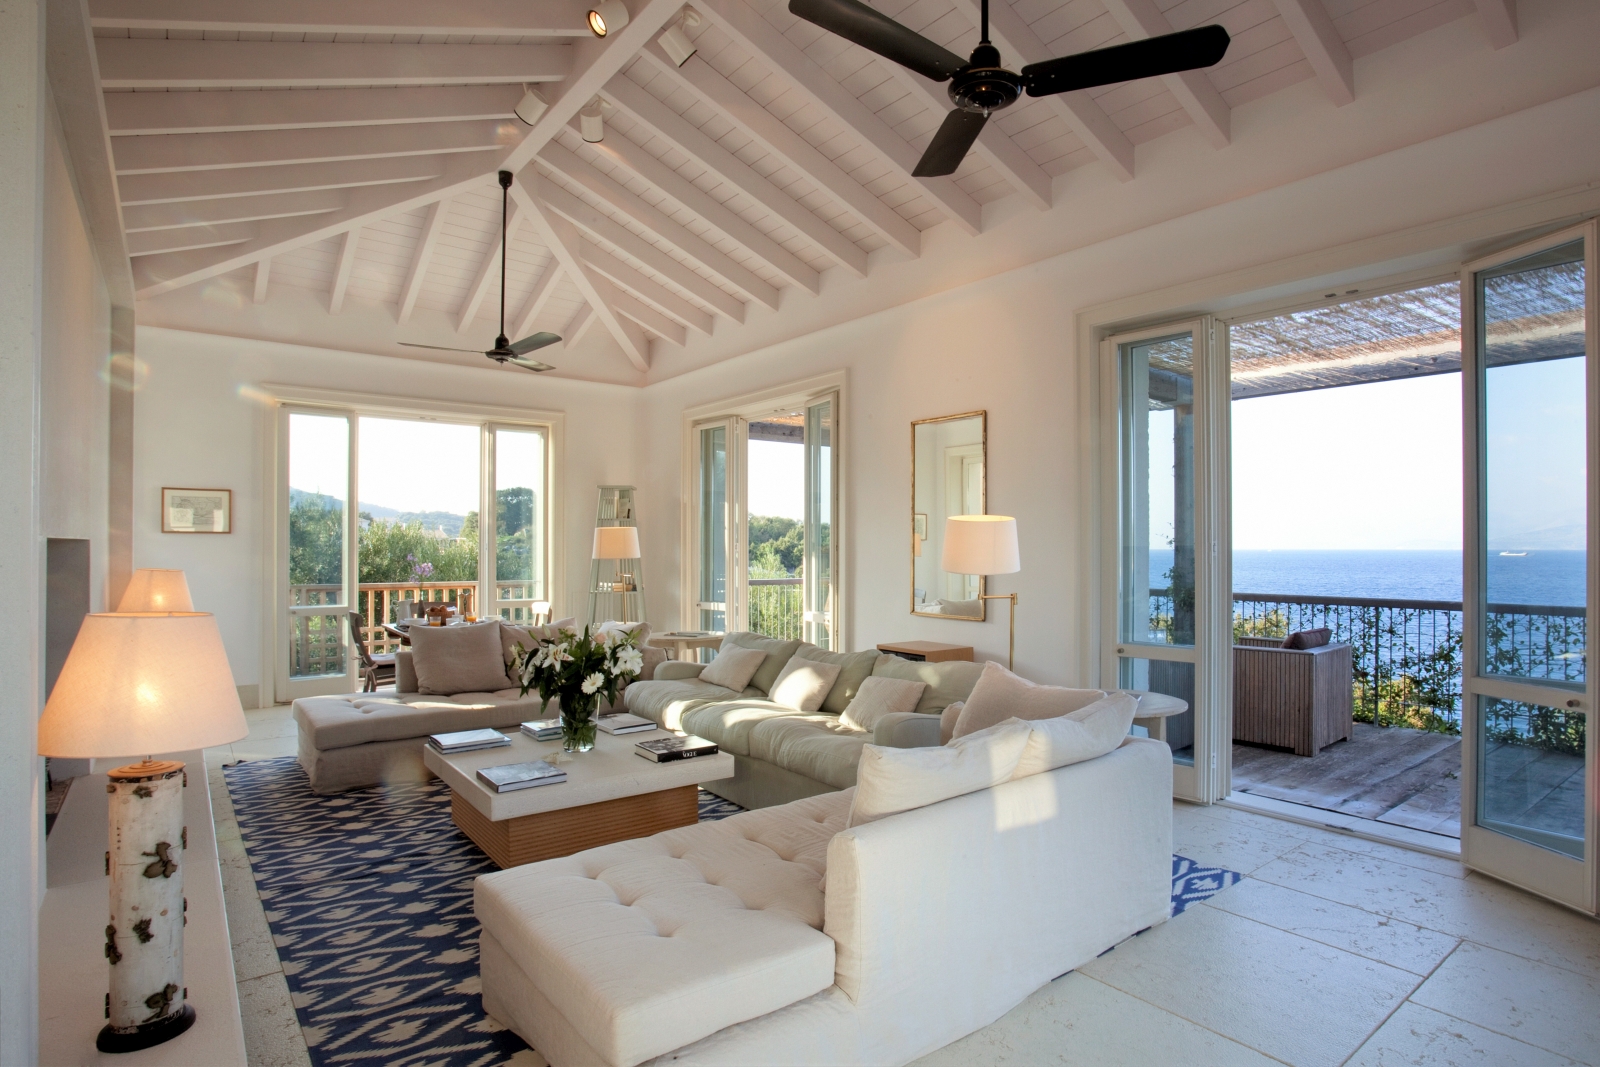 Living room with sofas, coffee table, flowers, lamps, fans, French doors and sea view at the Odysseus Estate on Corfu, Greece